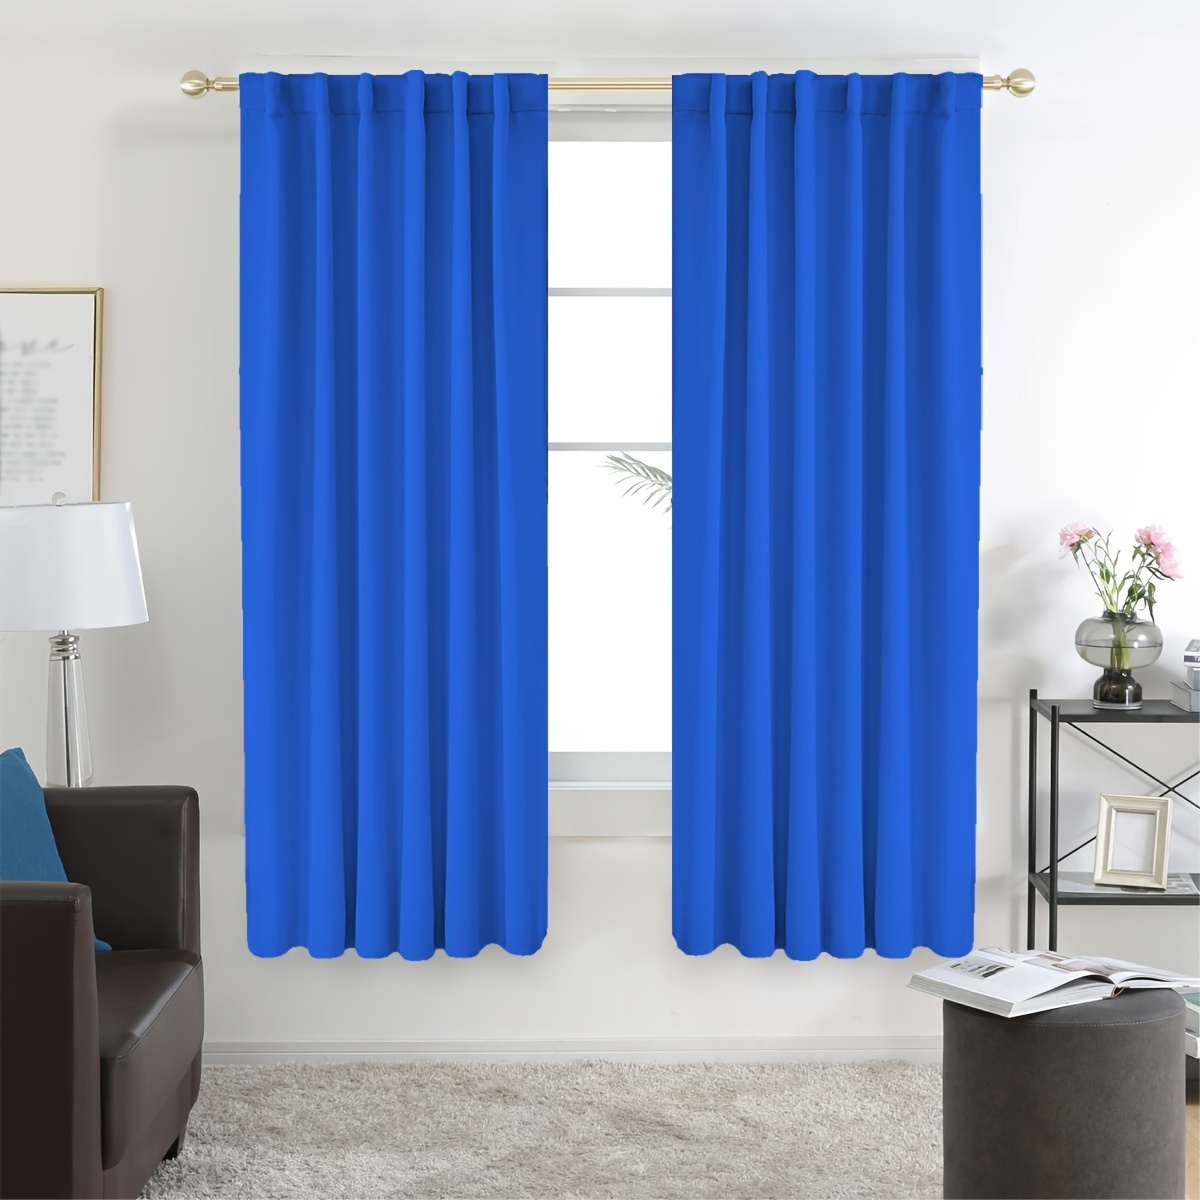 

Classic Style Thermal Insulated Blackout Curtain Panel With Eyelet And Back Tab Hanging Options, 100% Polyester Weave For Bedroom And Living Room Privacy, Energy Saving And Sun Protection - Green/blue